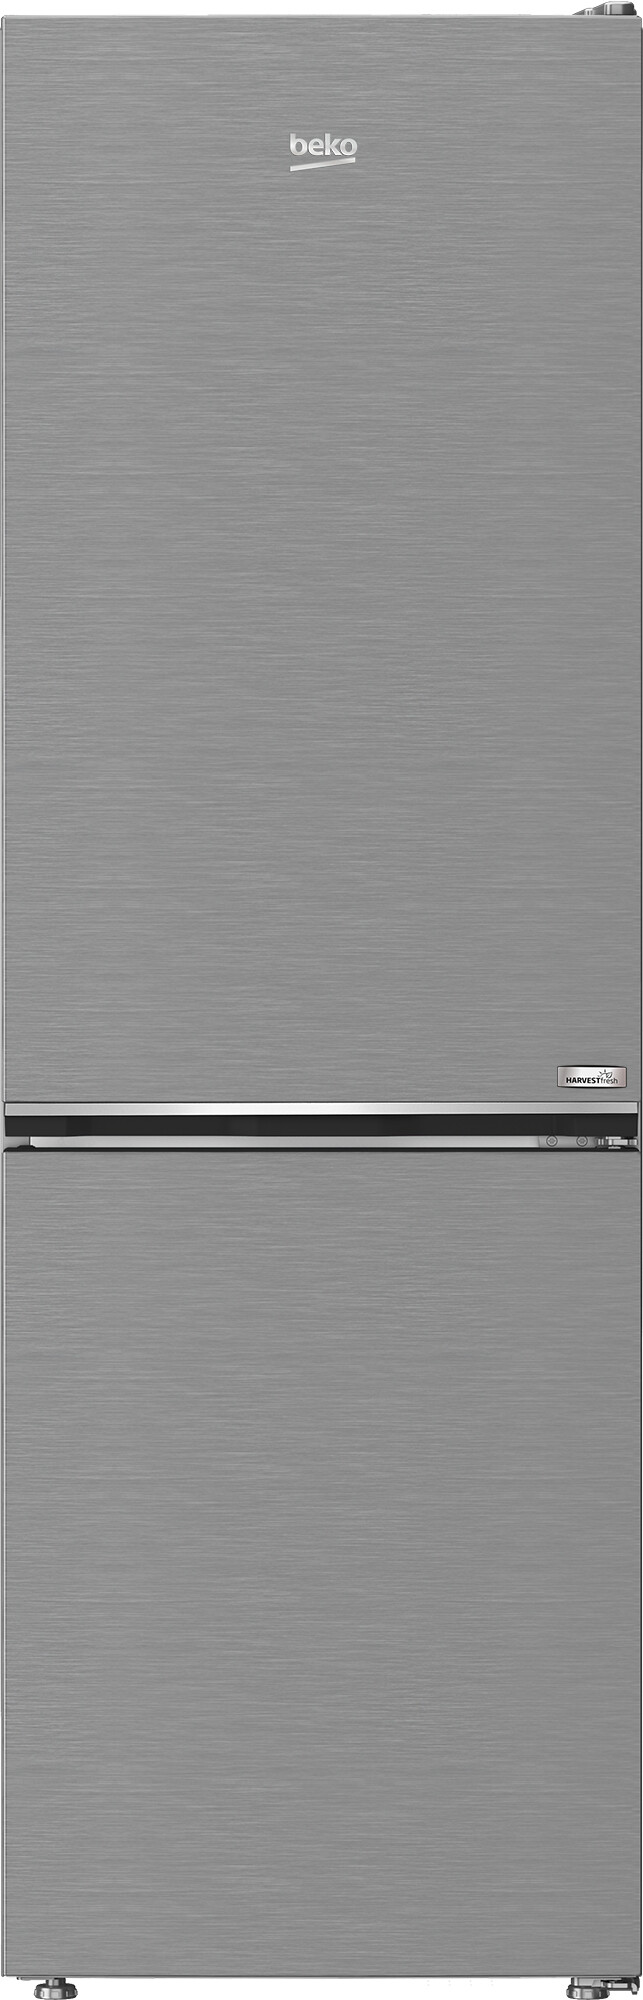 Beko CFG4686VPS 60/40 Frost Free Fridge Freezer – Stainless Steel Effect – E Rated #366064